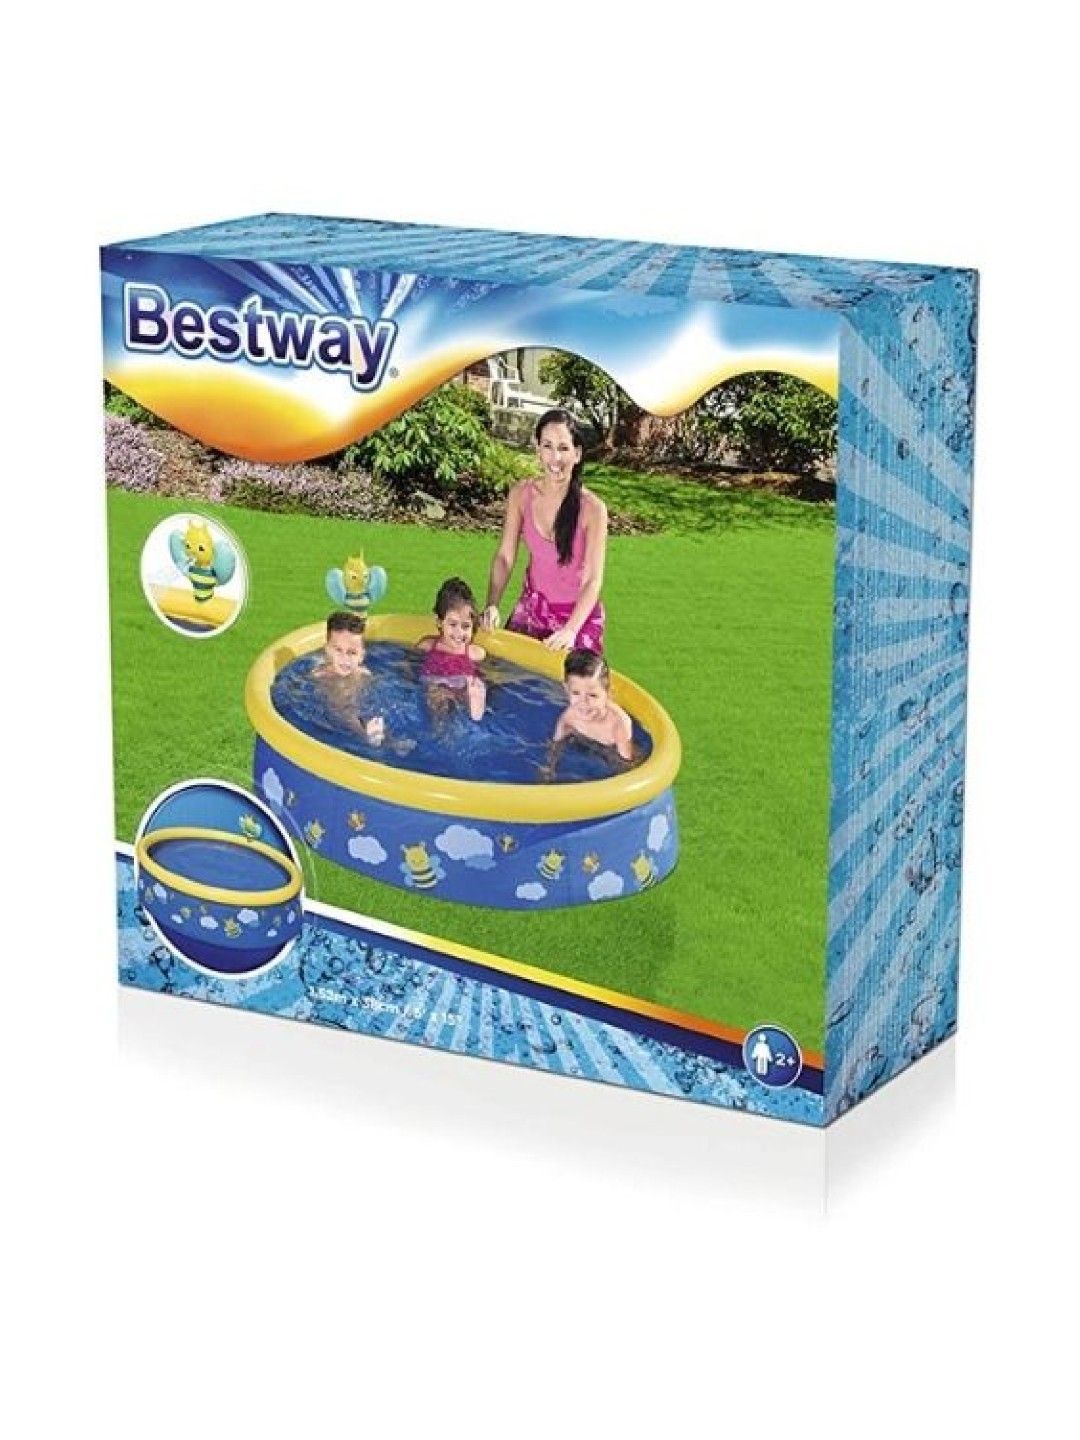 Bestway My First Fast Set Spray Pool (No Color- Image 1)